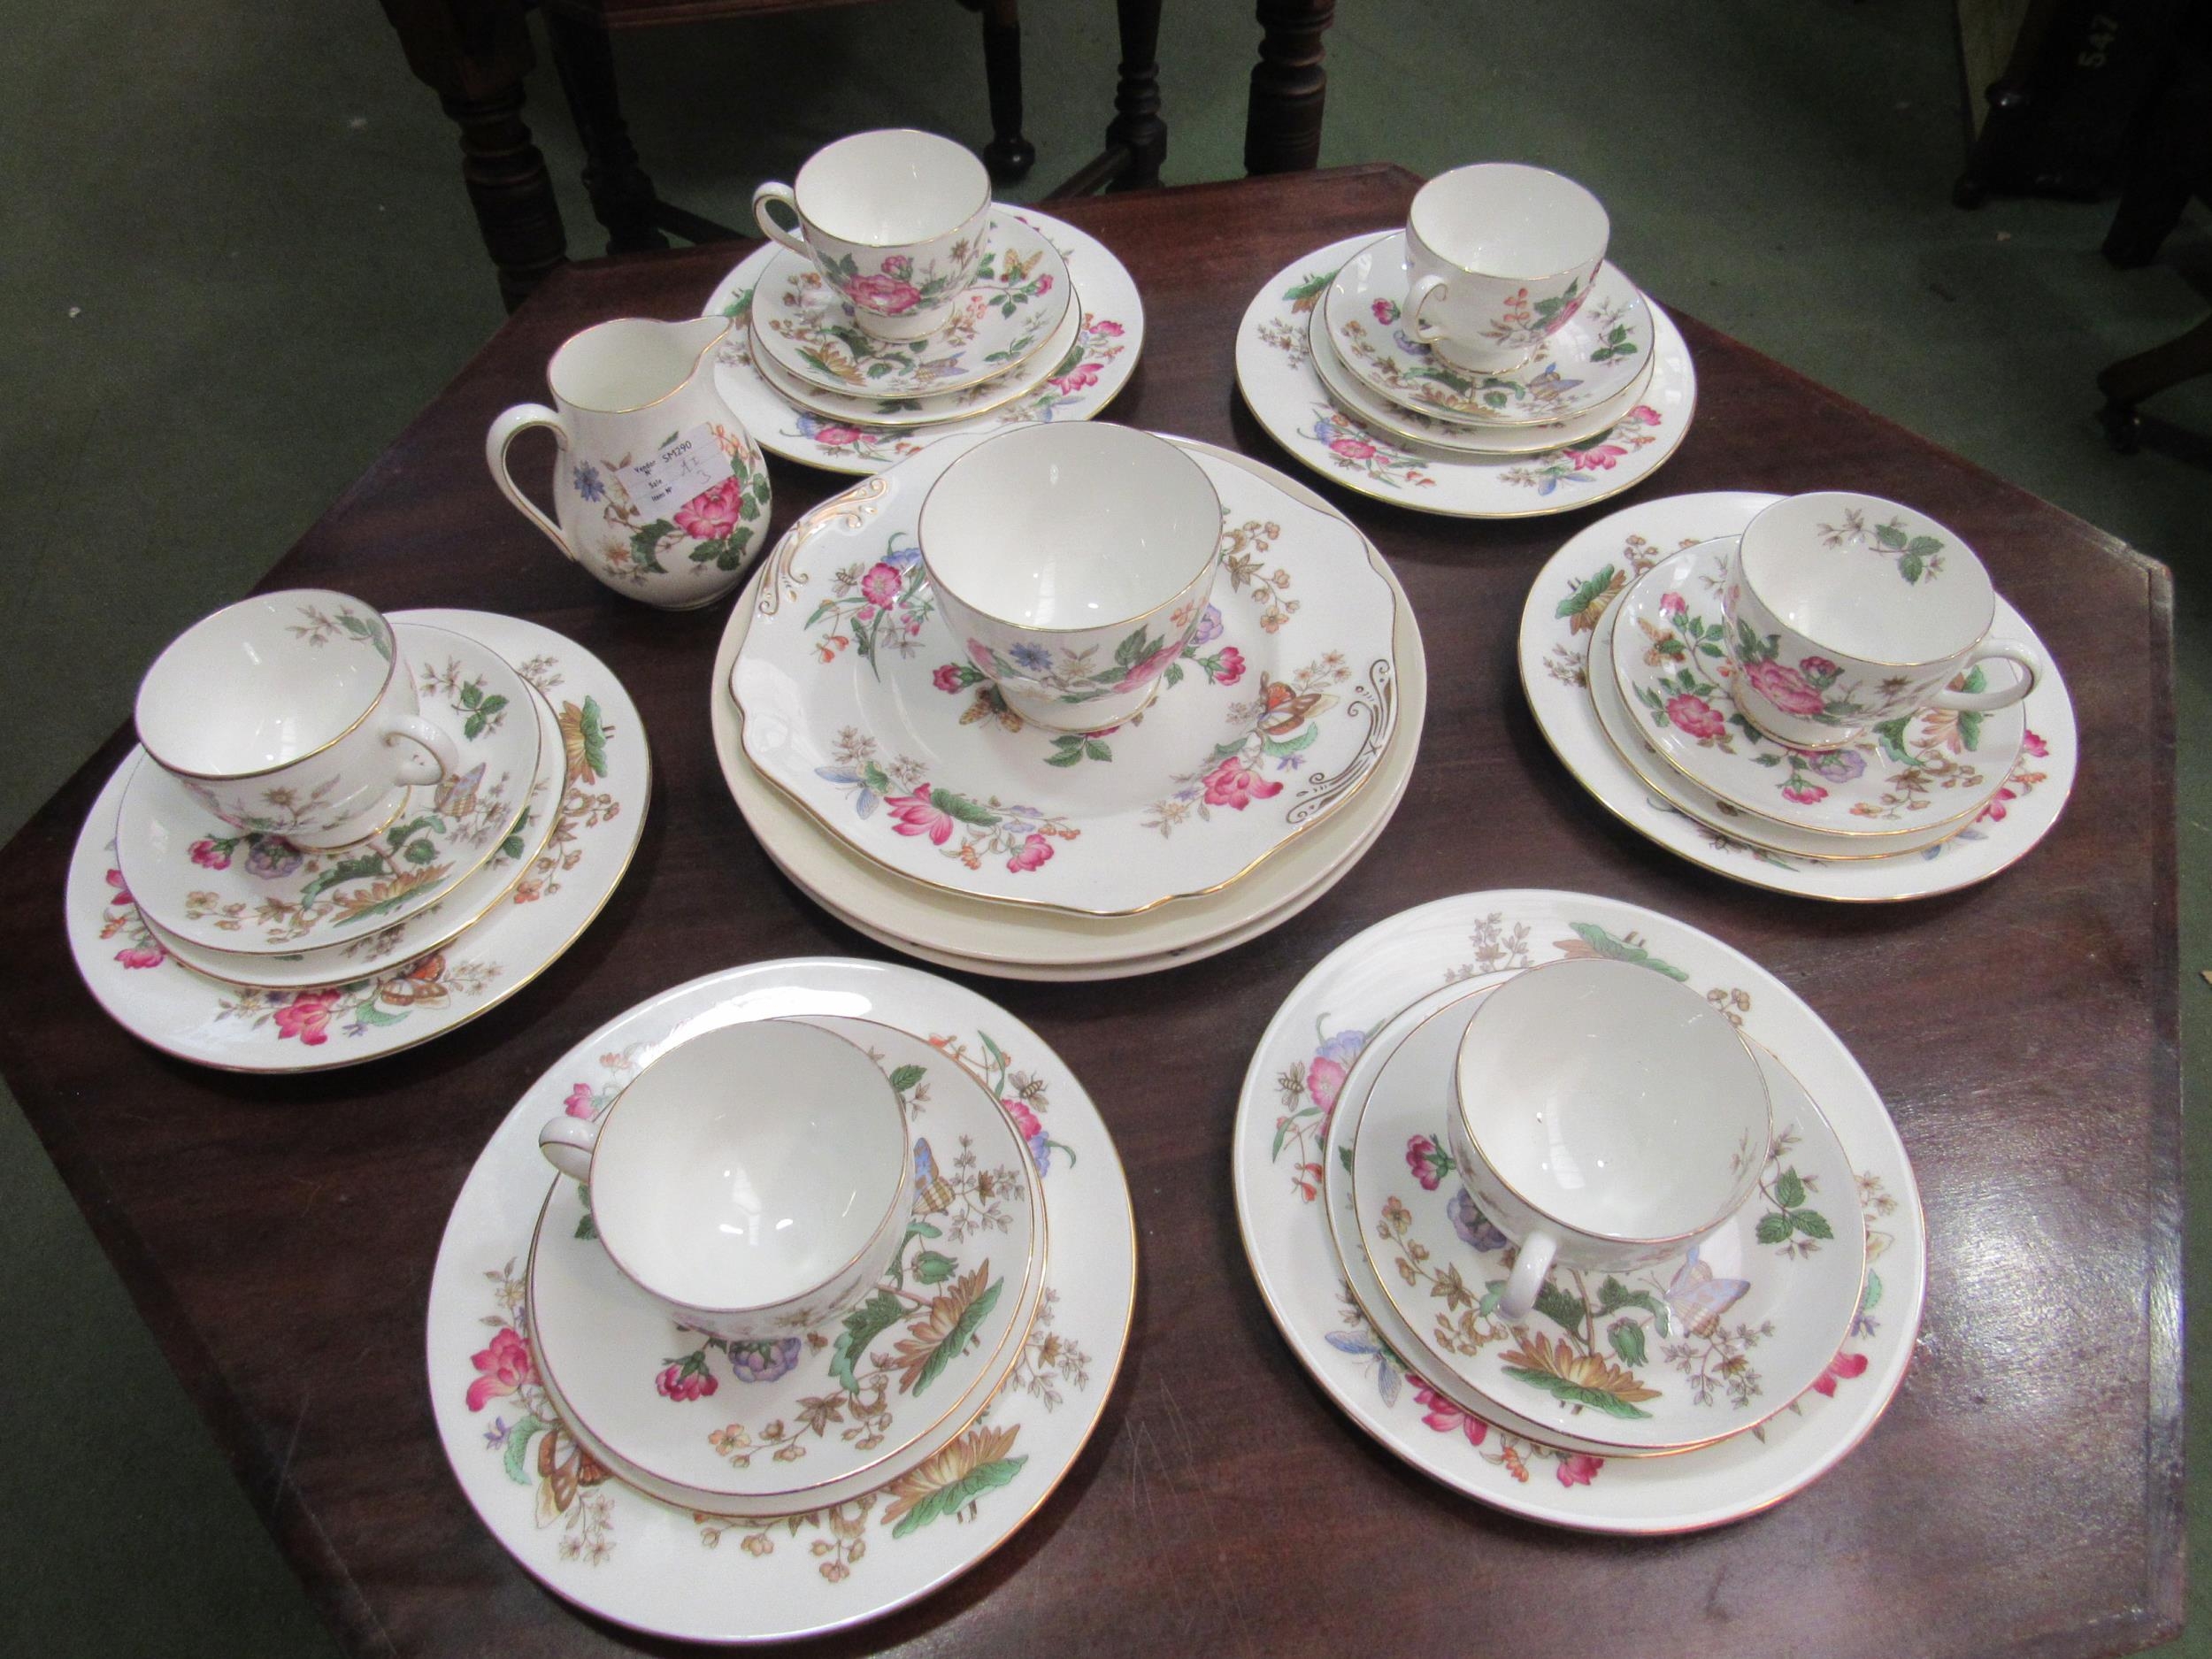 Wedgwood "Charnwood" dinner wares, cups, saucers, etc